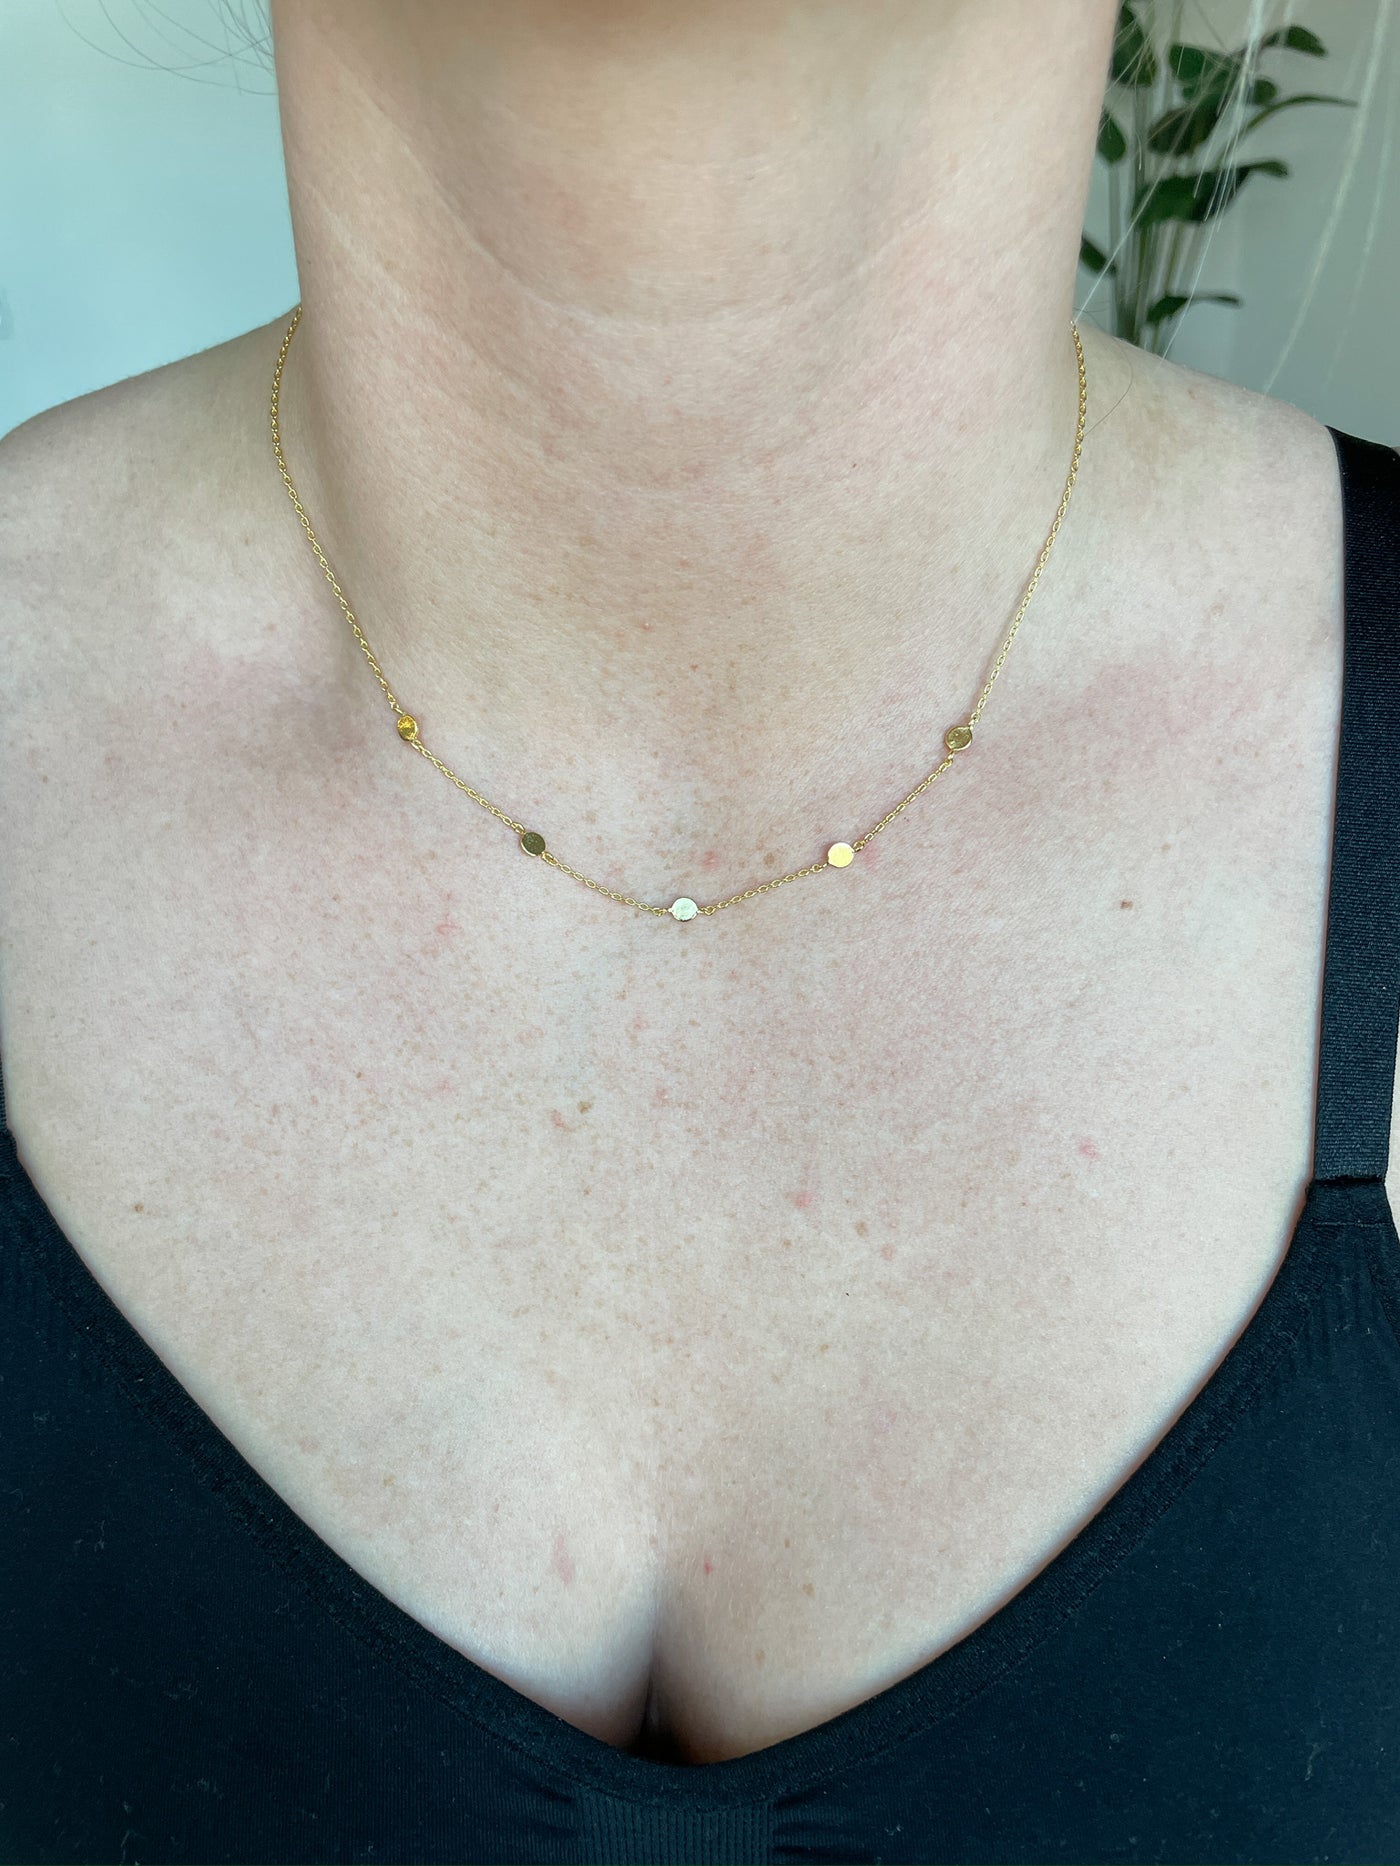 The Dainty Circle Necklace in Gold